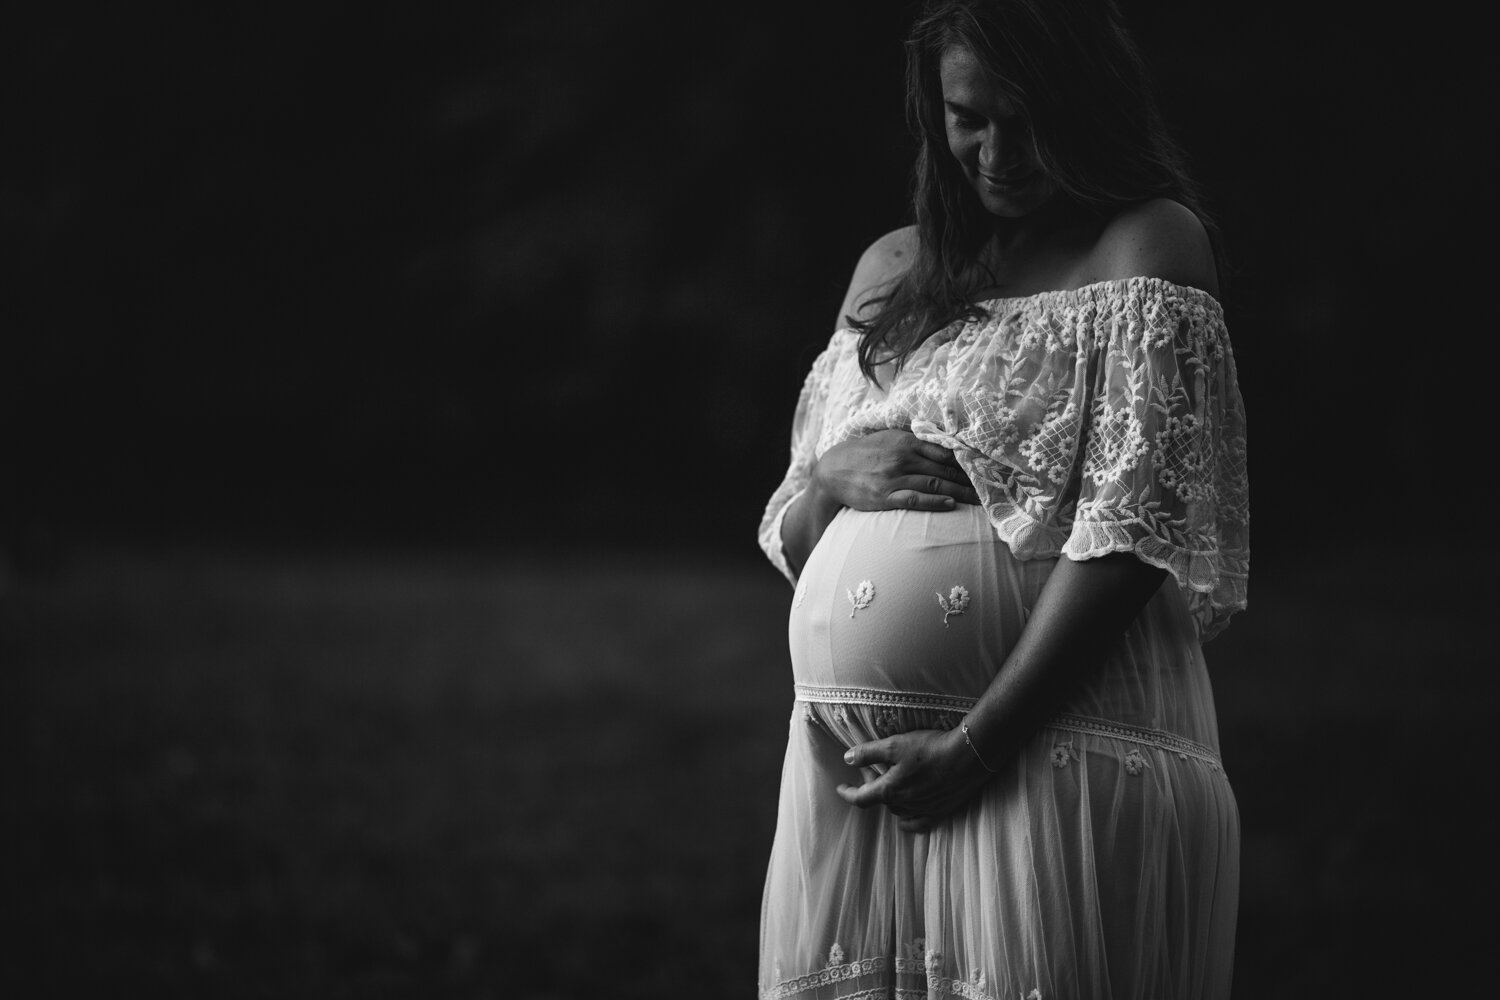 Central_Park_Maternity_Session_with_NYC_Baby_Photographer_Nicole_Hawkins_Photography_September_2019_Lara-16.jpg